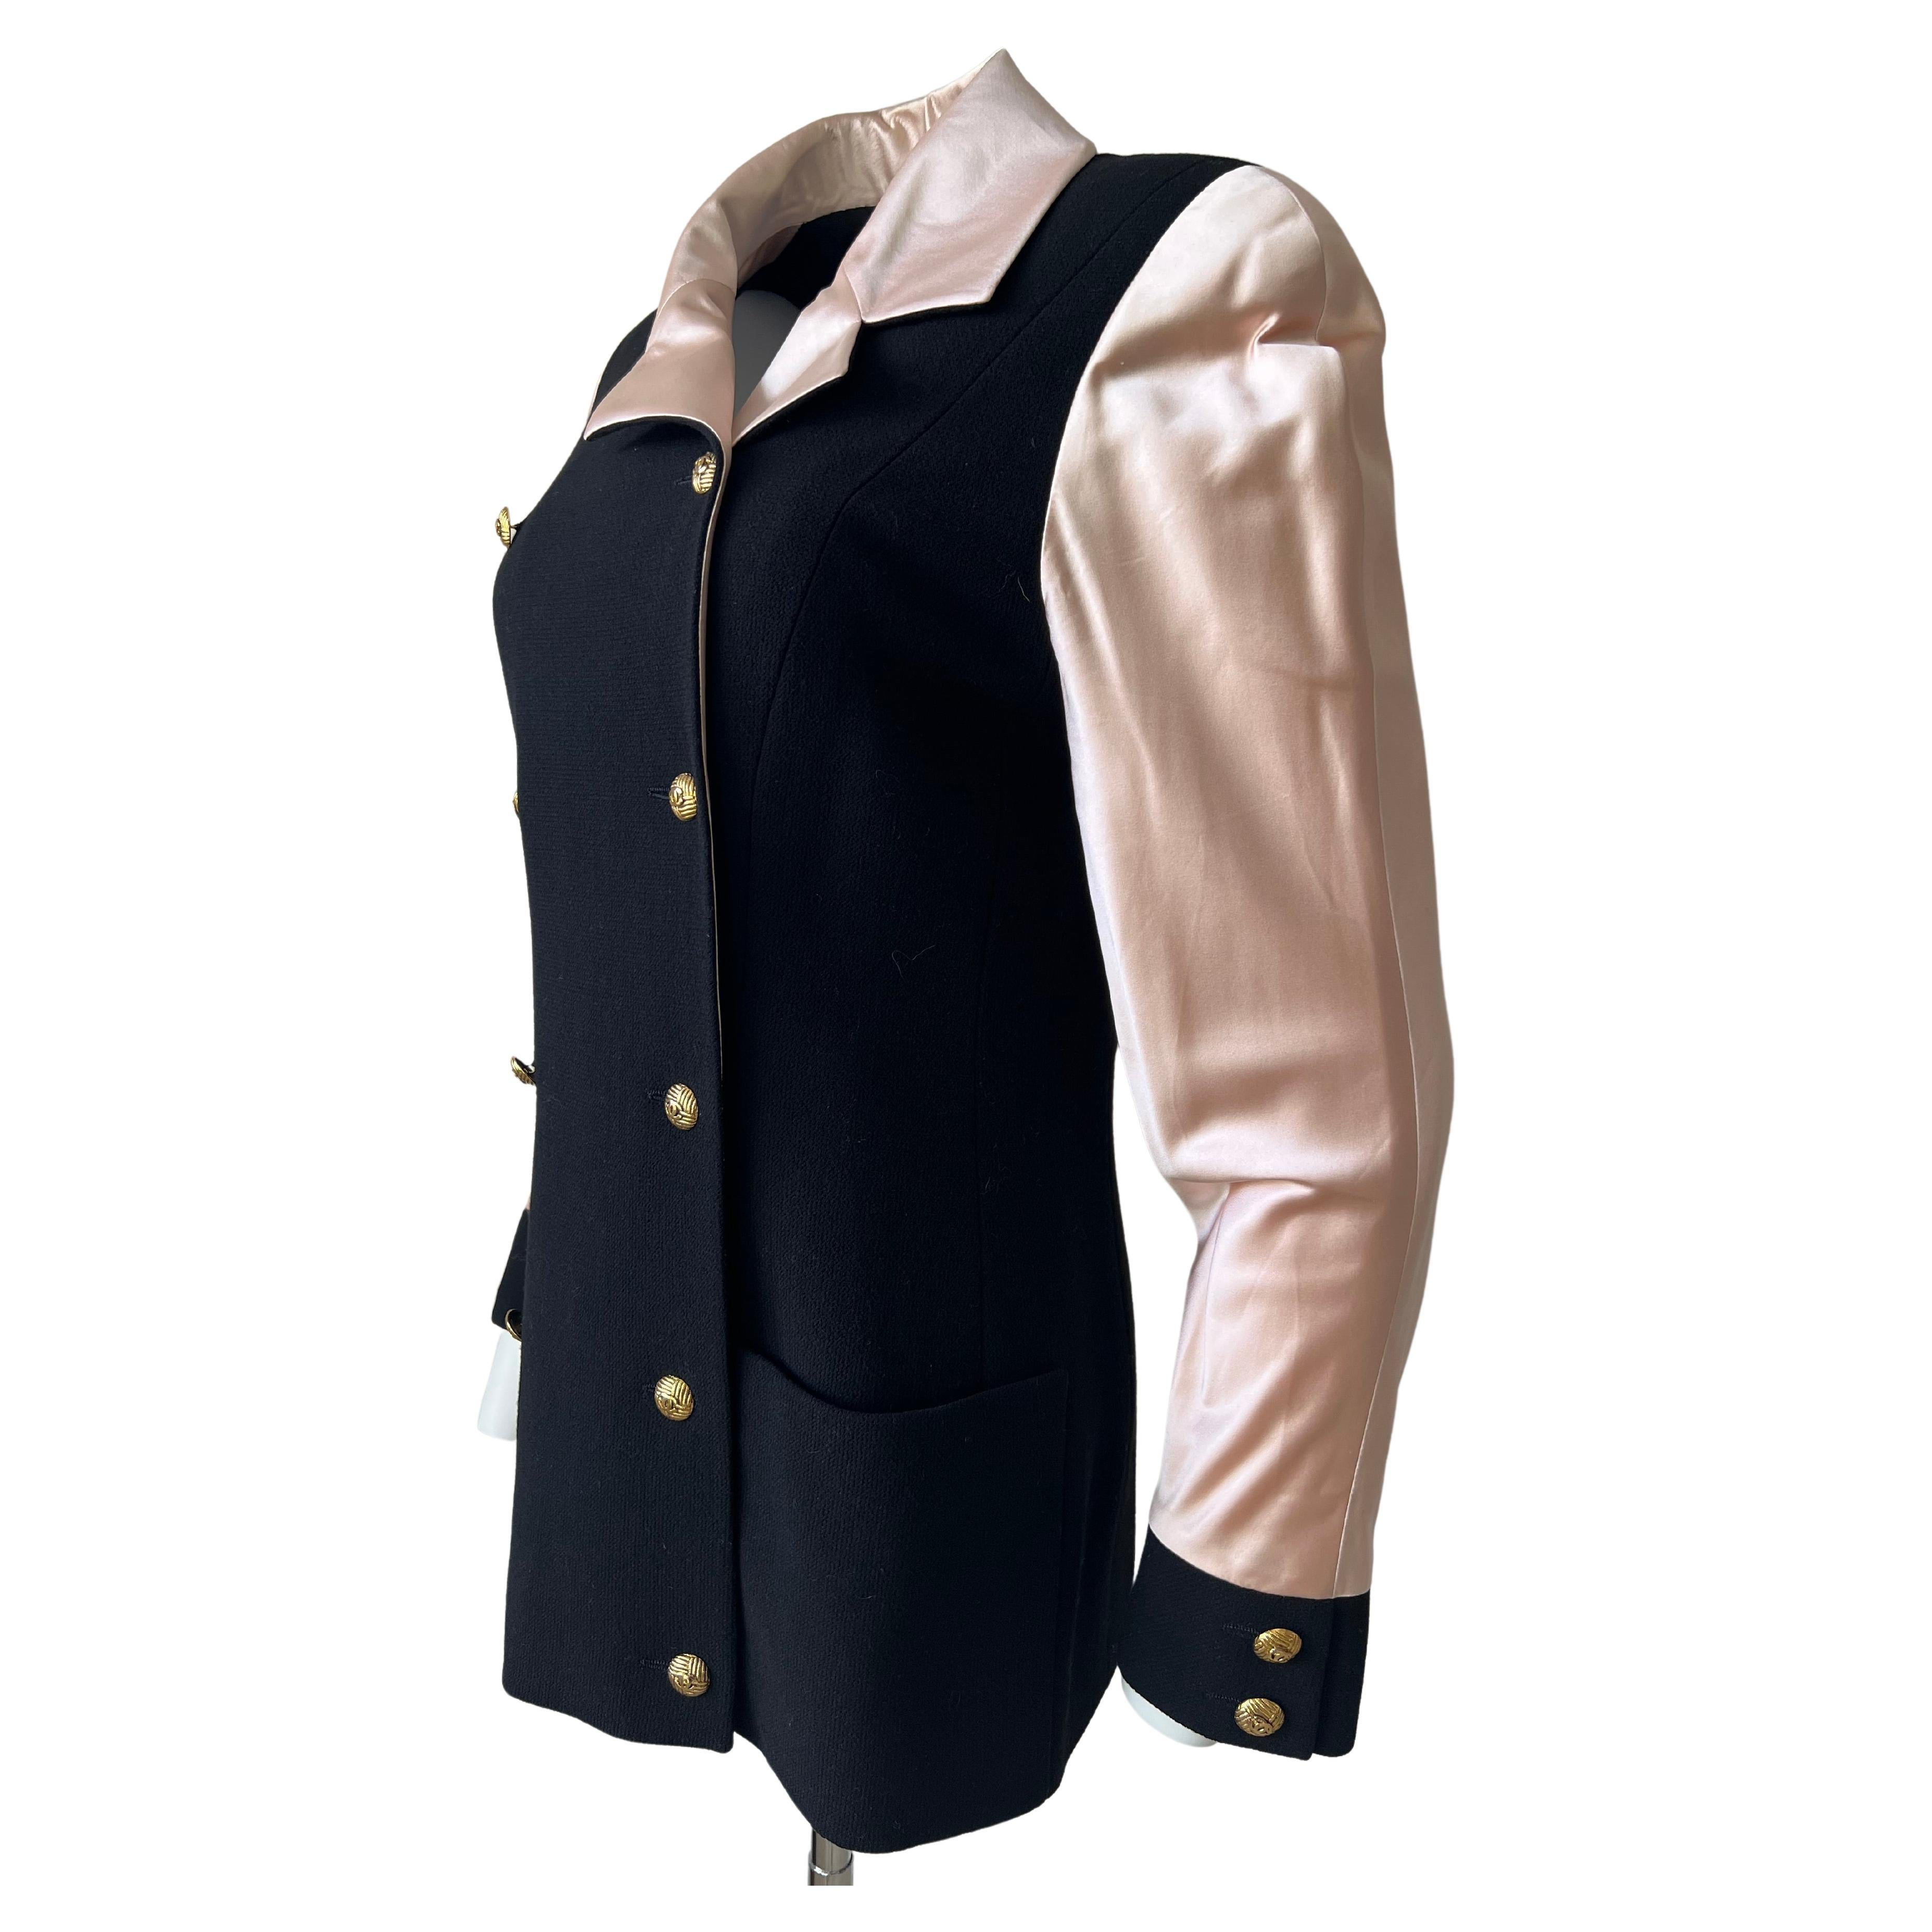 Superb Chanel jacket from the 23 collection of the year 1984, a year after Karl Lagerfeld is named Artistic Director of CHANEL. Black wool jacket, sleeve and collar in powder pink silk is the iconic and identical color of the chanel house. Ten gold